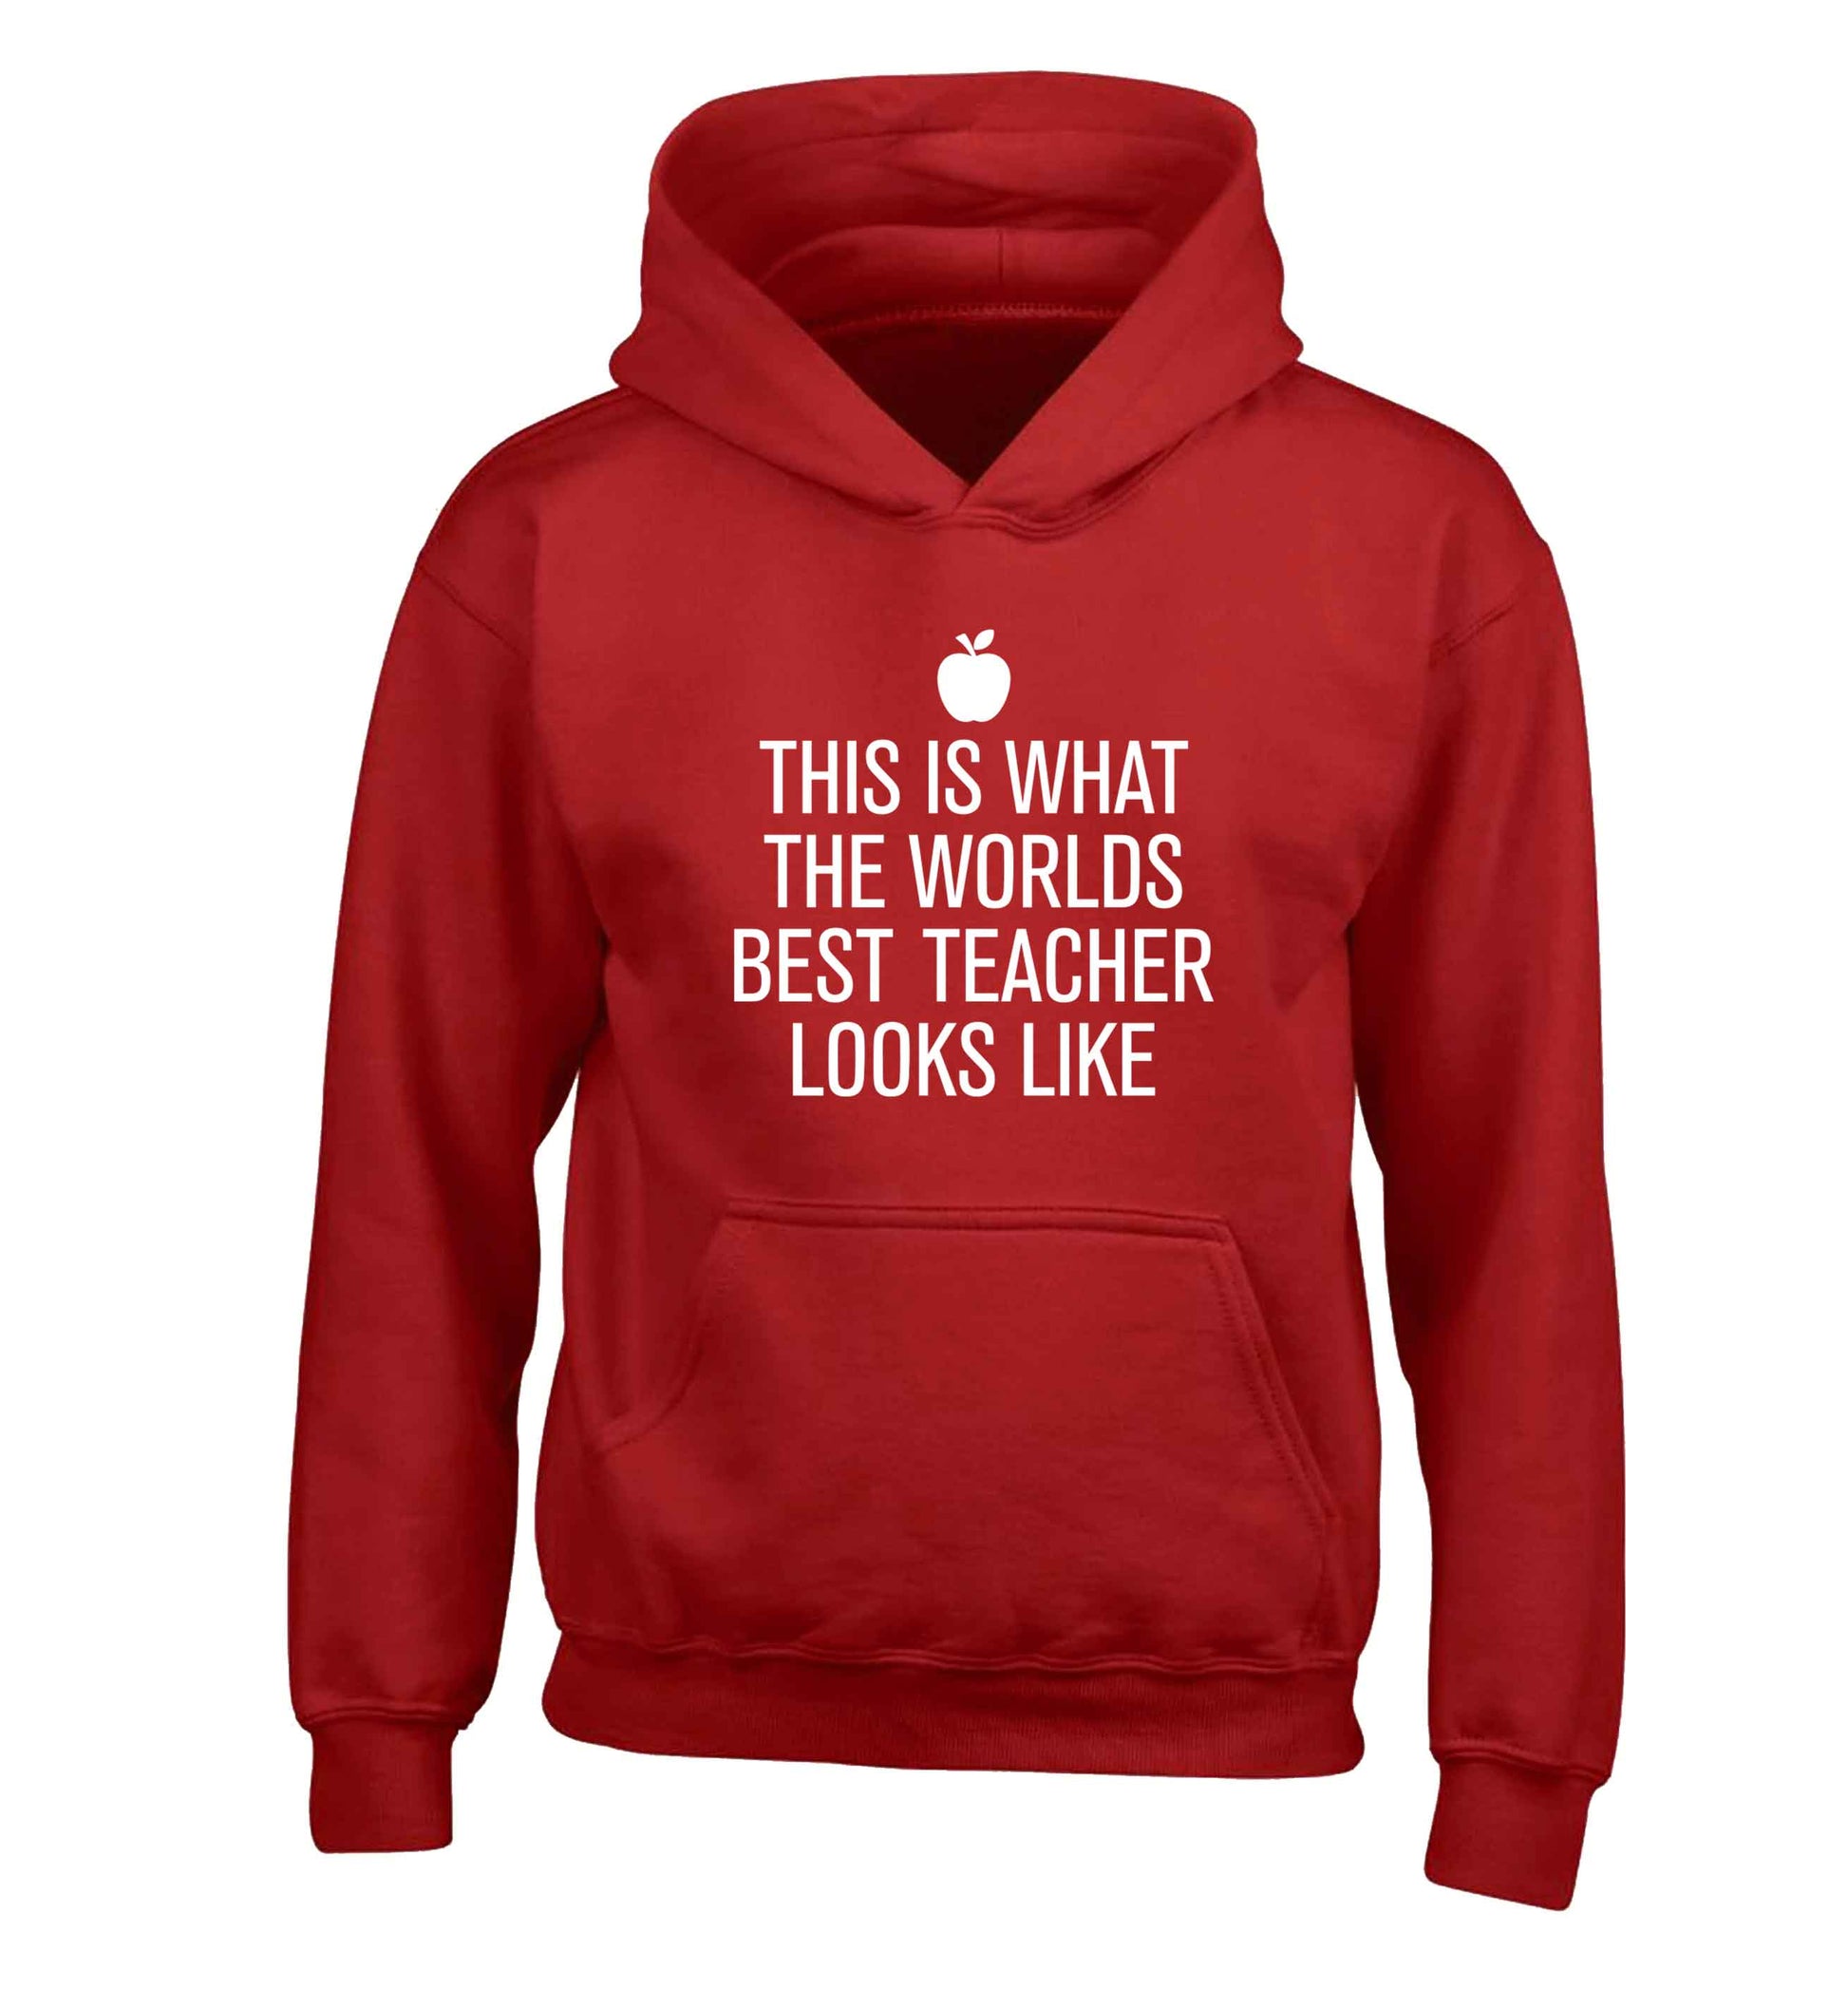 This is what the worlds best teacher looks like children's red hoodie 12-13 Years